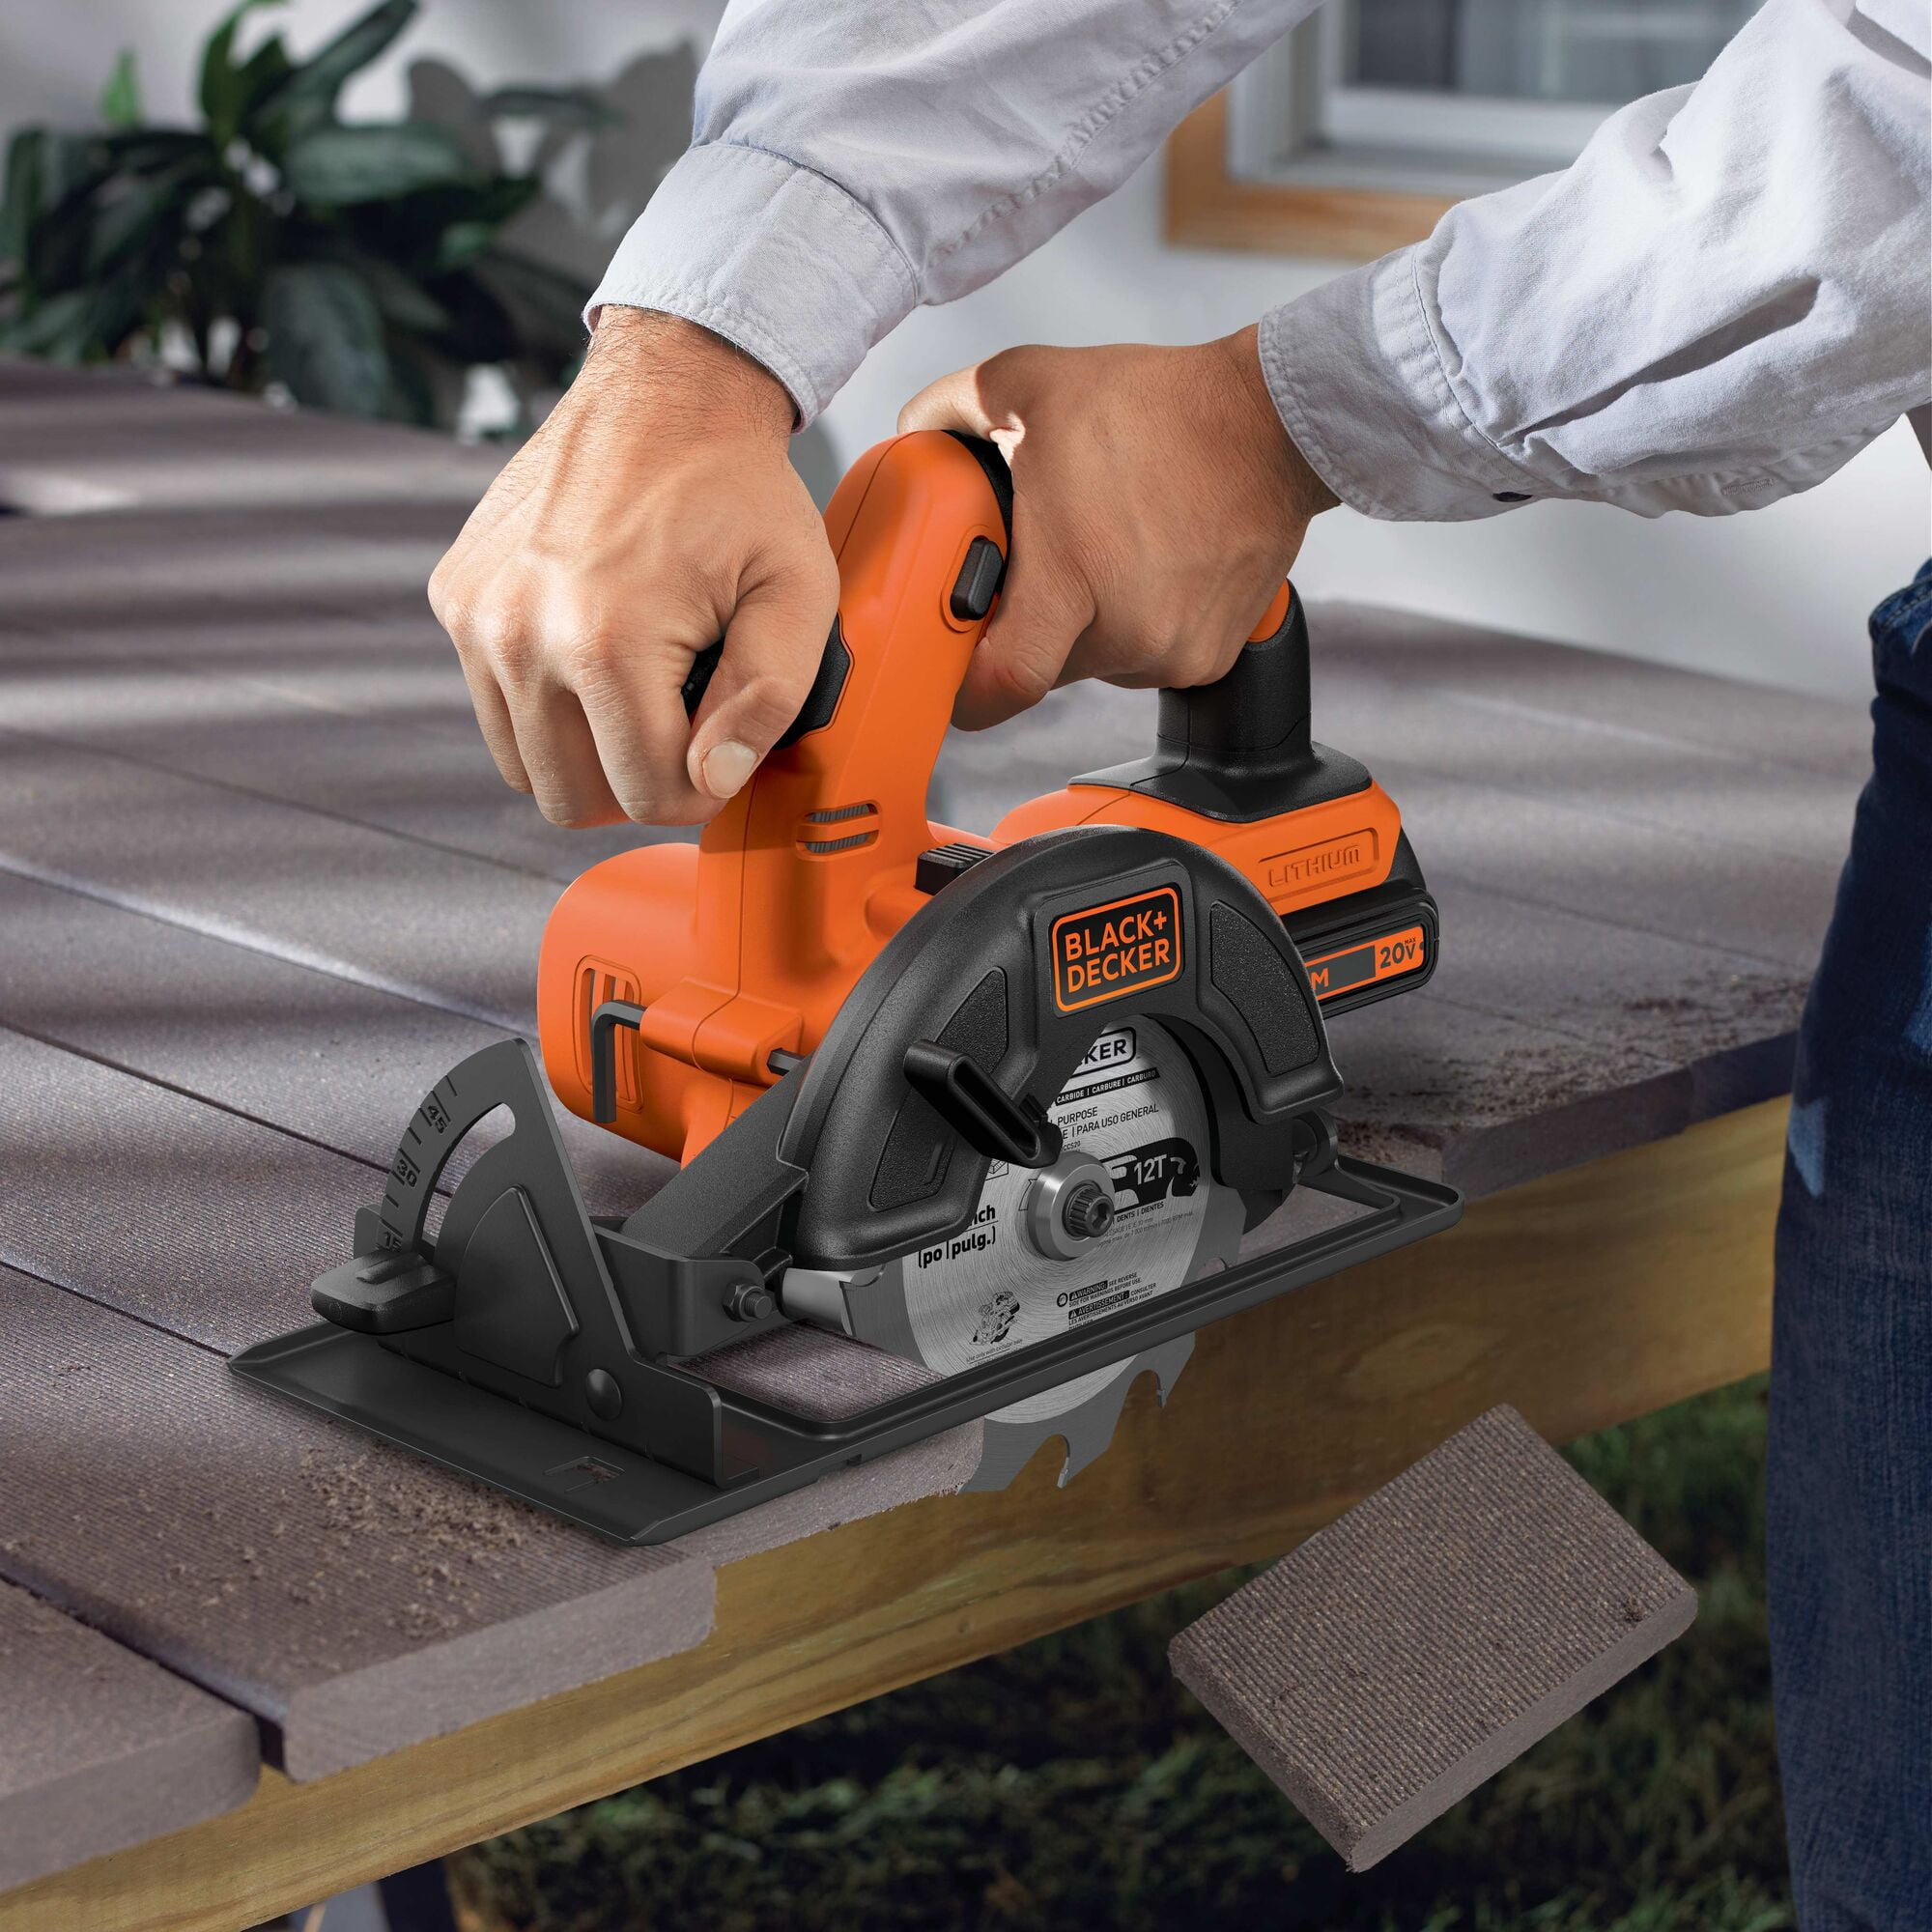 Black+Decker 20V Max Lithium Ion 4 Tool Combo Kit with Drill/Driver,  Circular Saw, Mouse Detail Sander and Light #BD4KITCDCMSL (4 Piece)